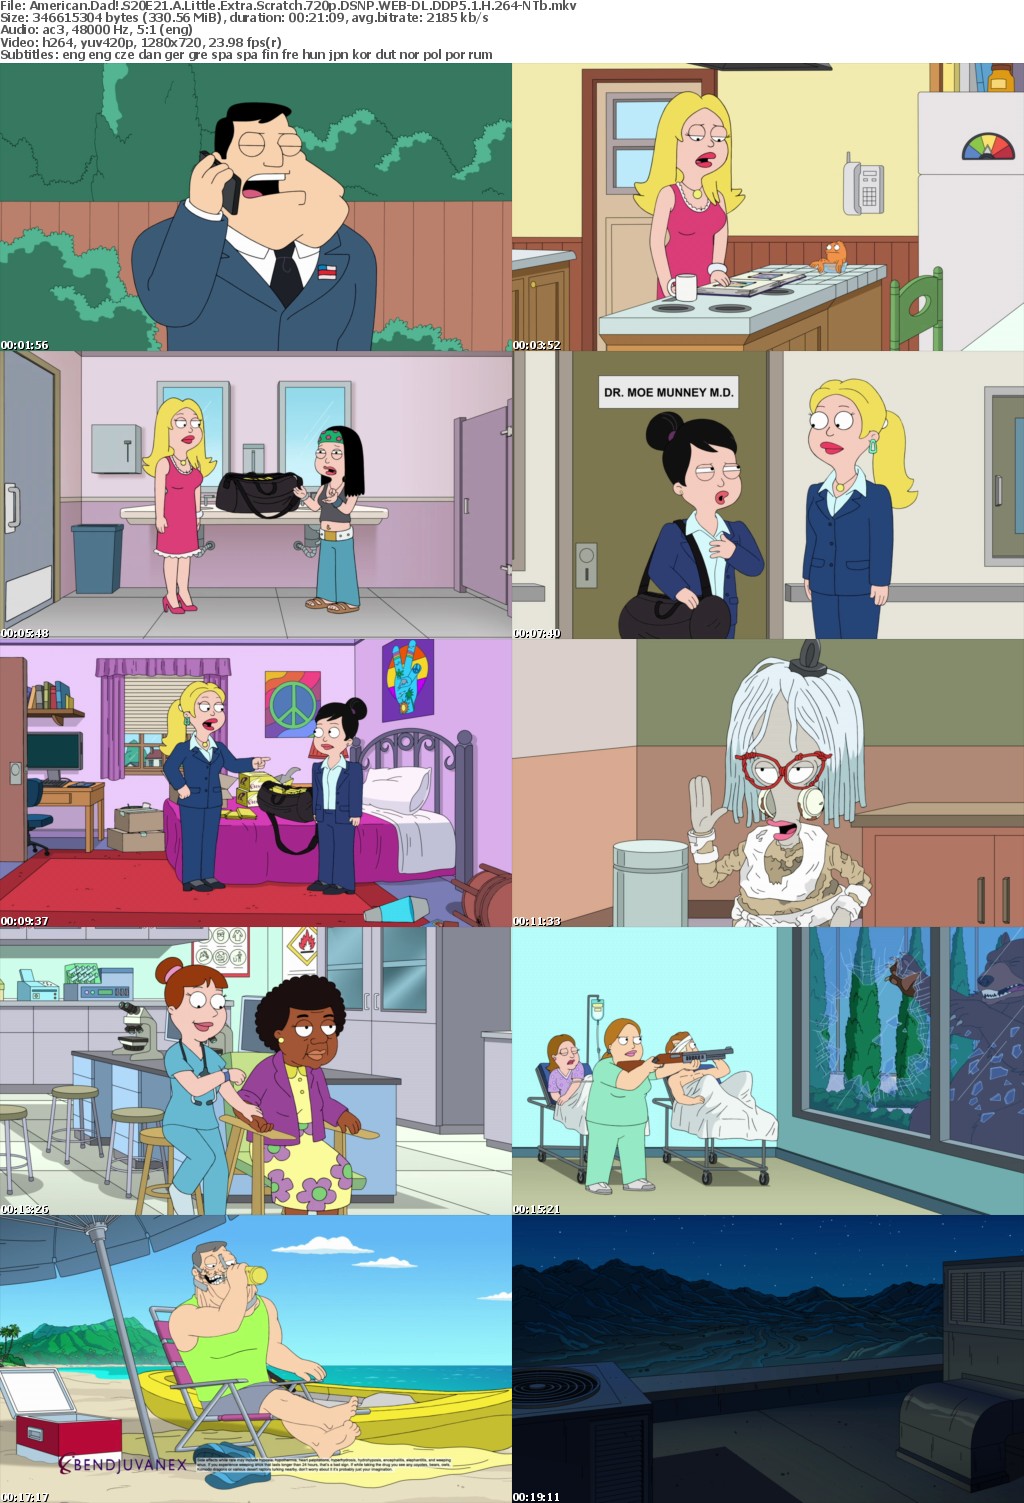 American Dad! S20E21 A Little Extra Scratch 720p DSNP WEB-DL DDP5 1 H 264-NTb